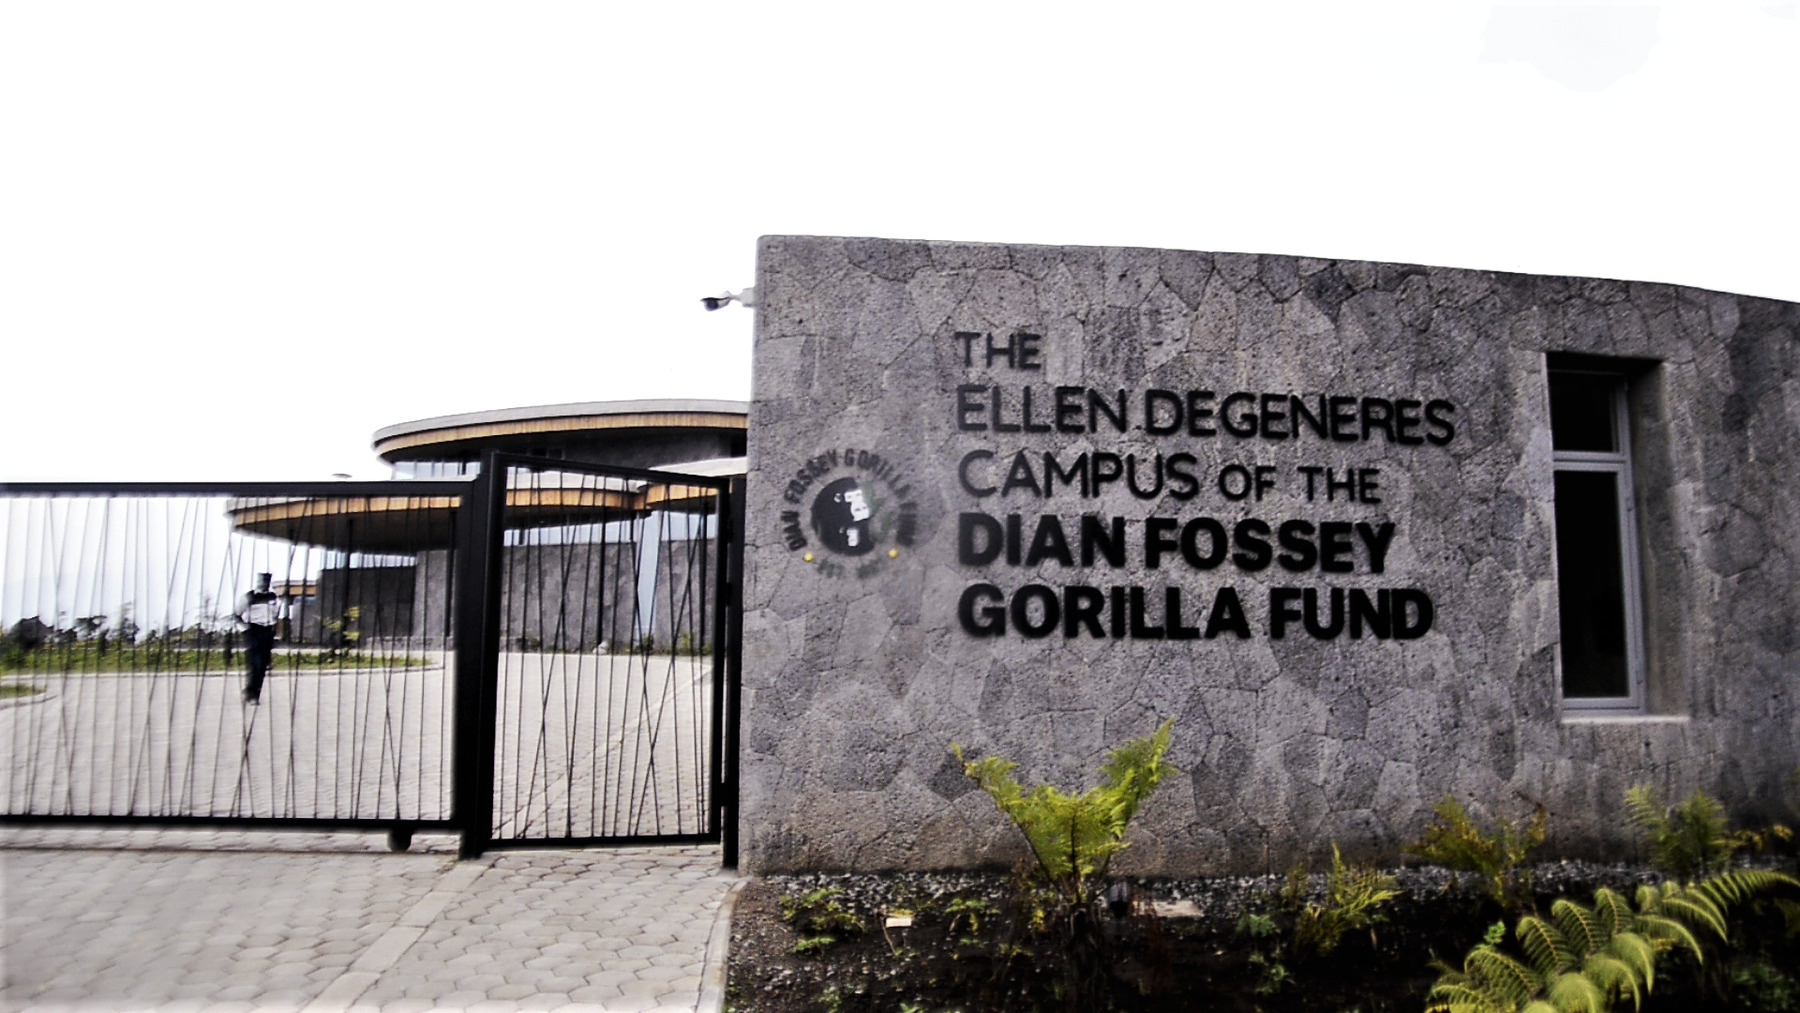 The Ellen DeGeneres Campus of the Dian Fossey Gorilla Fund officially inaugurated last week after four years of construction. 